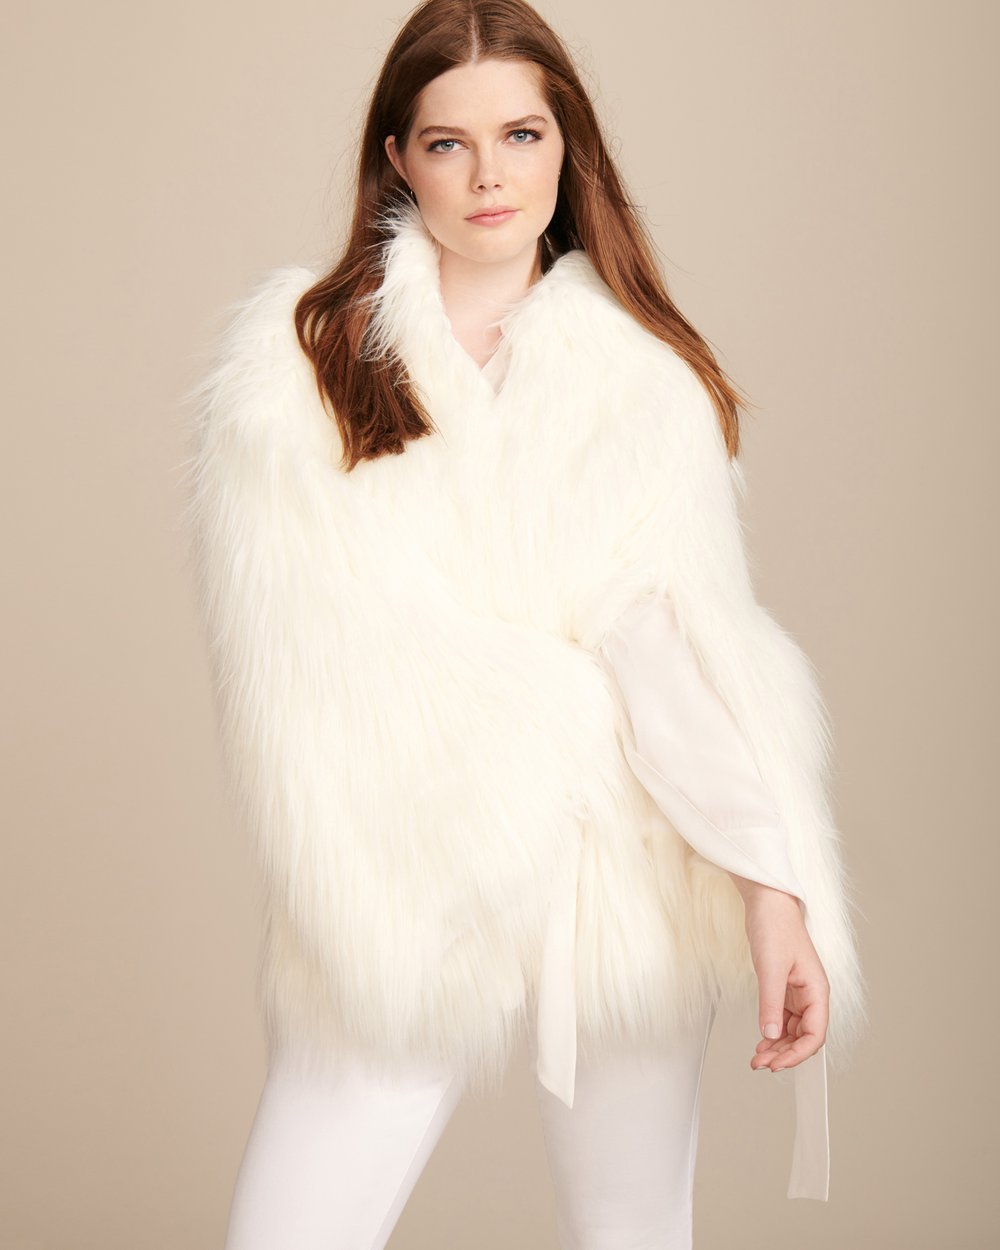 Luxury Plus SIze Fashion Finds at 11 Honore: HOUSE OF FLUFF Convertible Plus Size Cape Coat